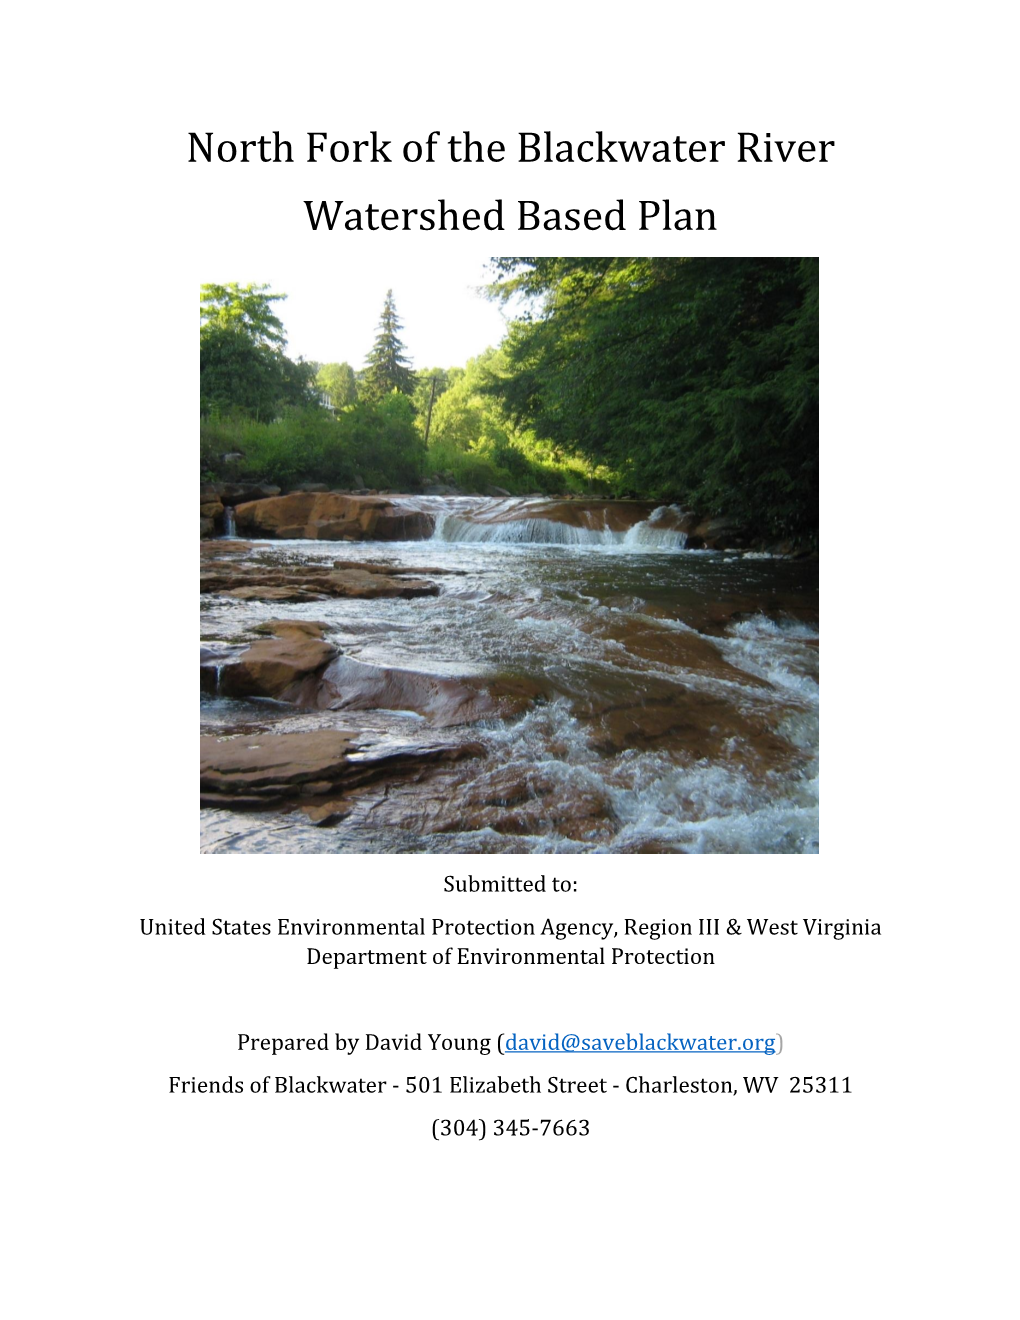 North Fork of the Blackwater River Watershed Based Plan